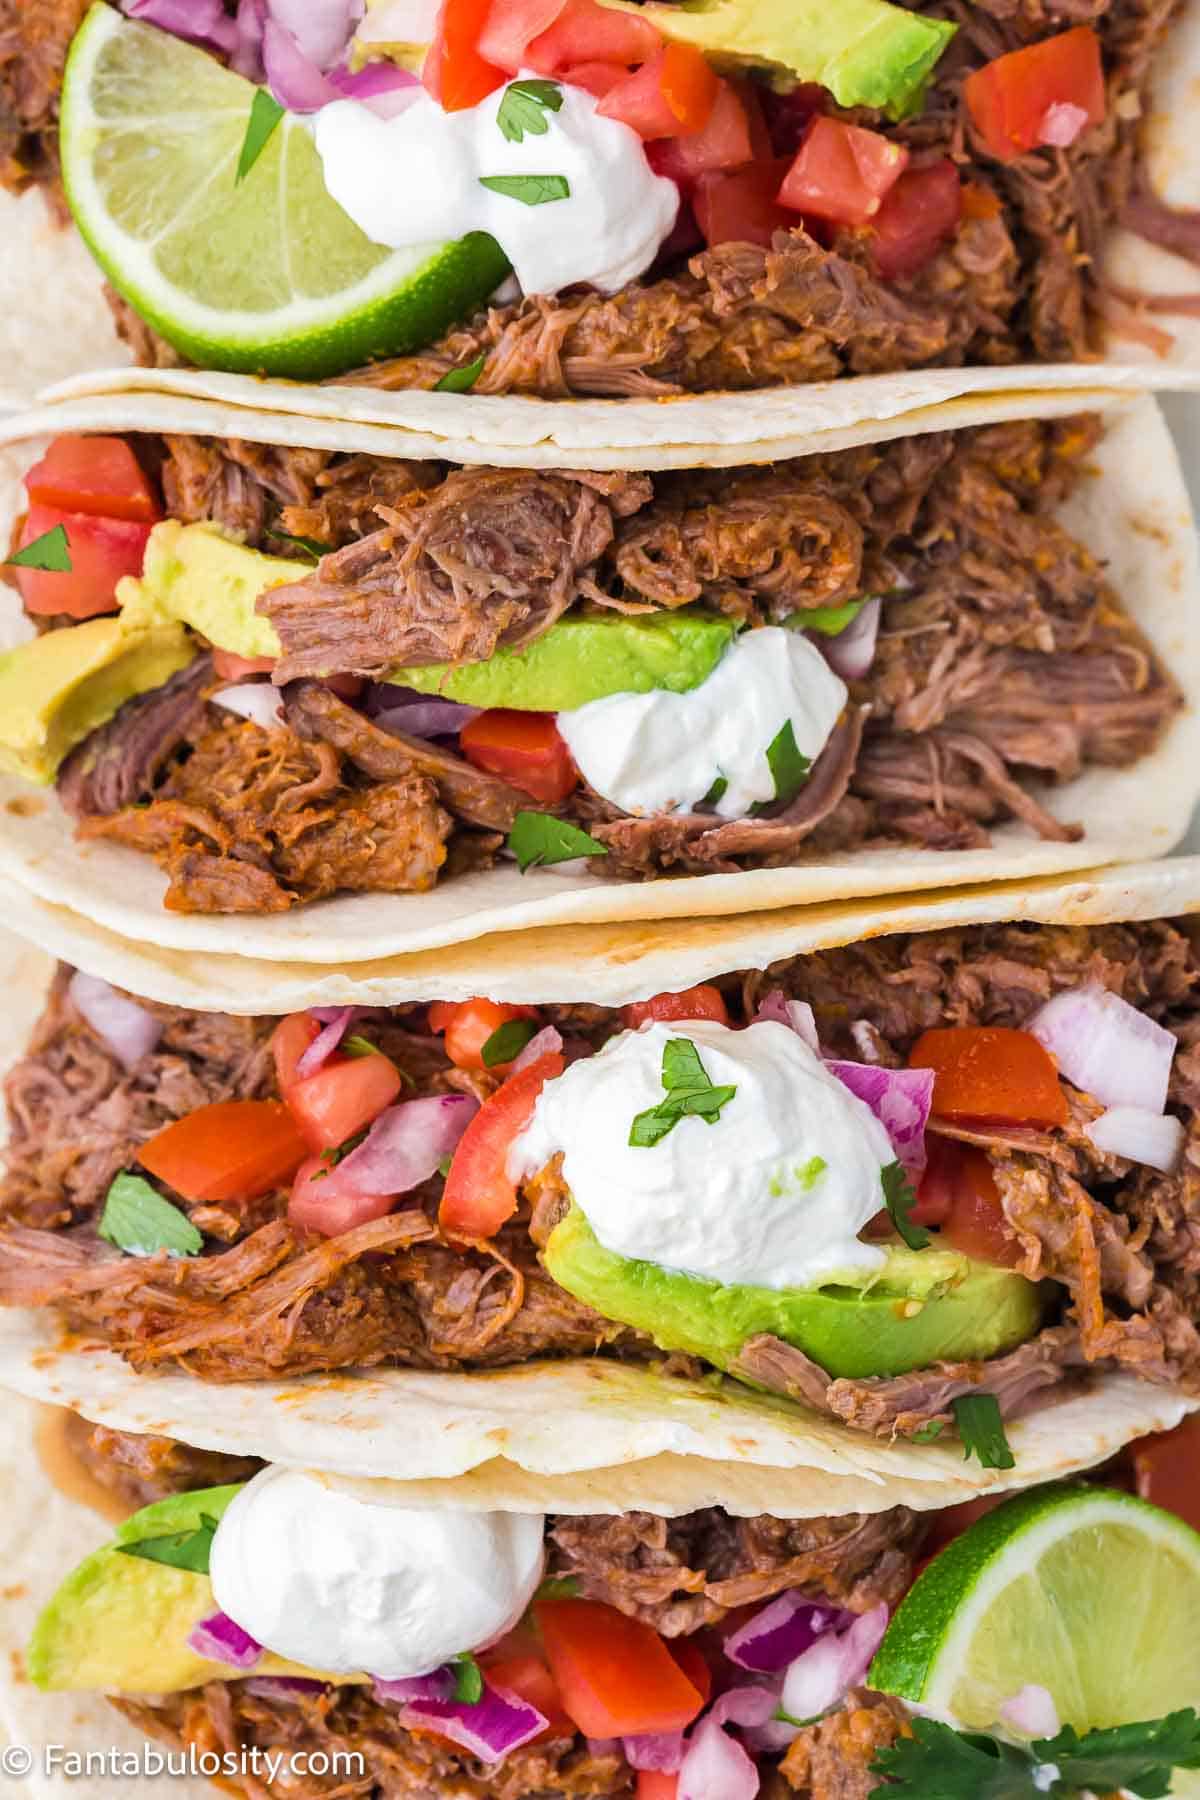 Shredded beef tacos folded up in line with toppings.